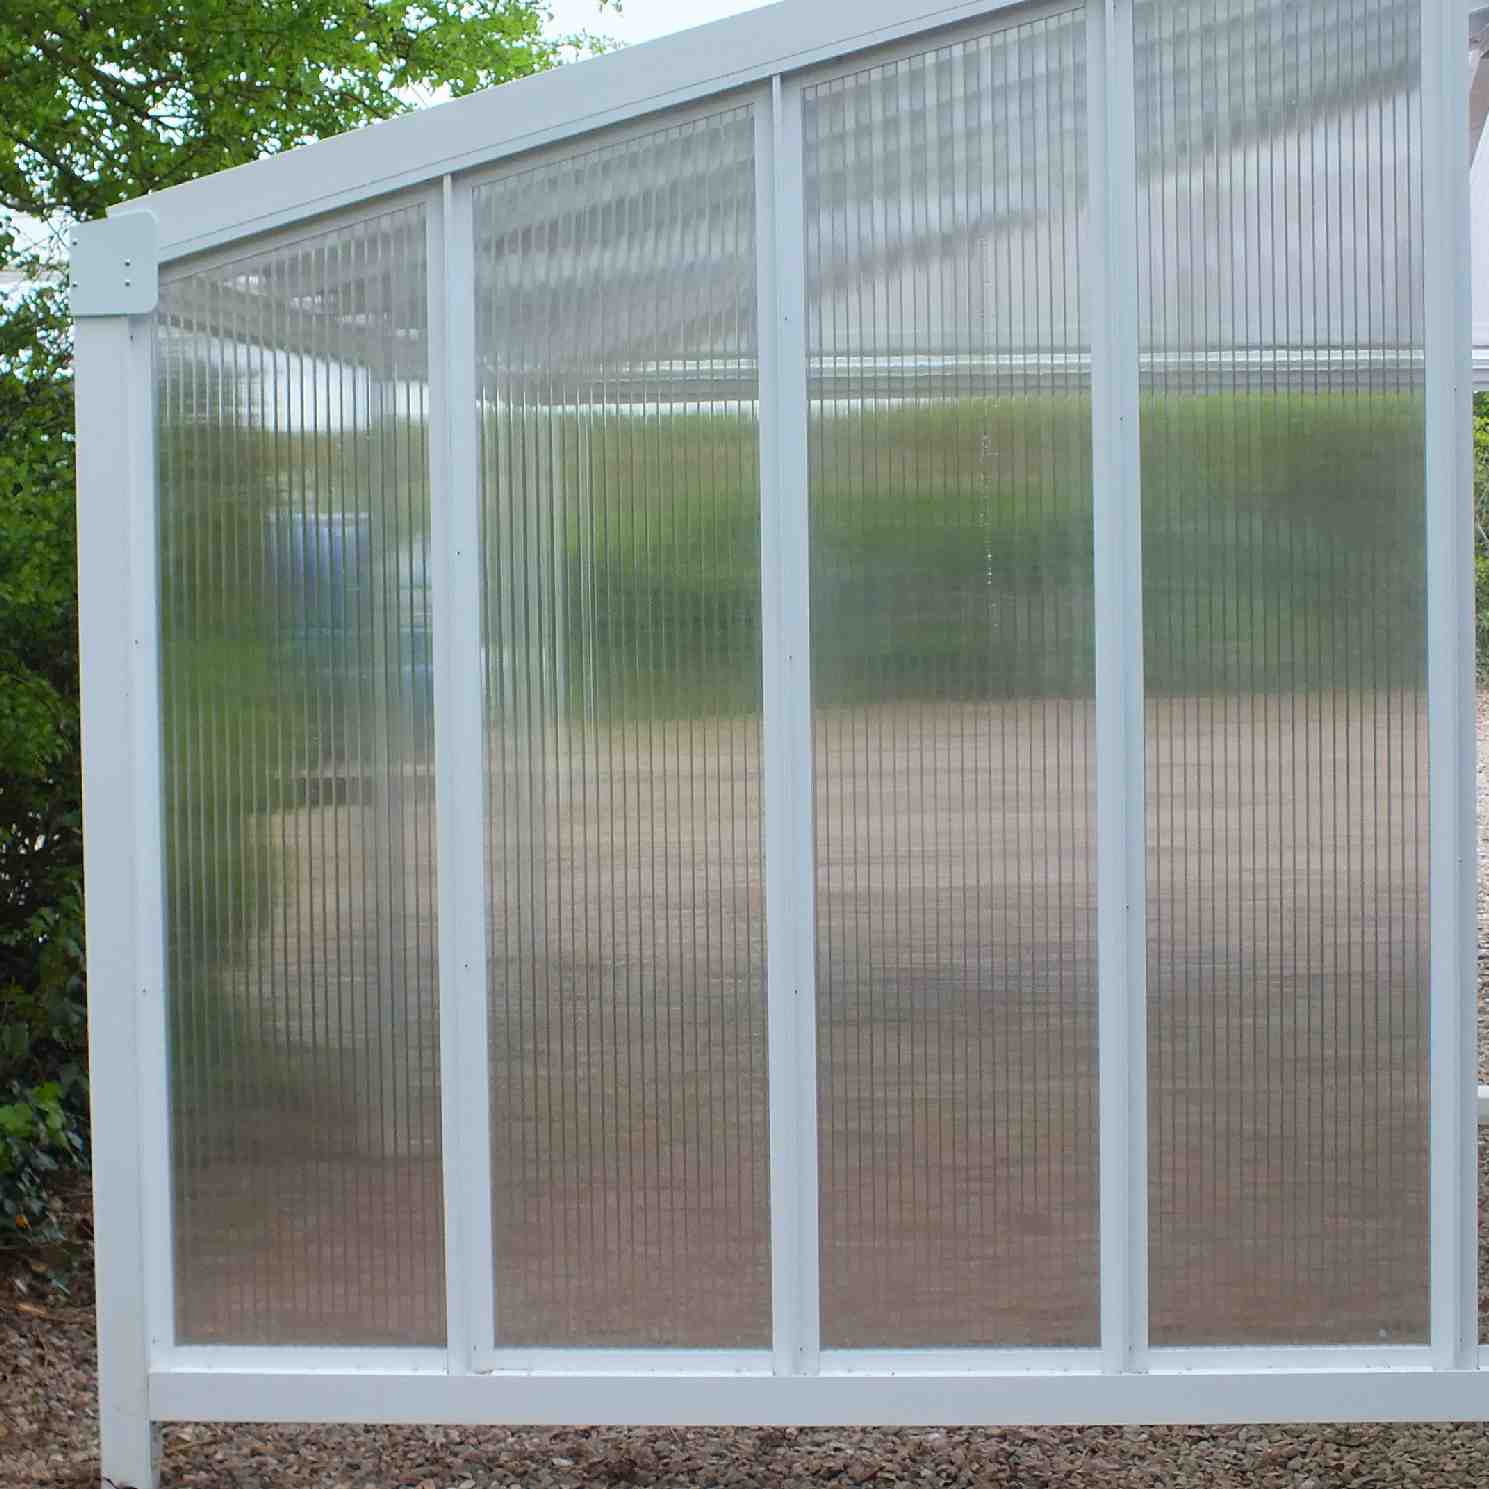 Omega Smart Canopy - FULL Side In-Fill Section for Sides of Canopy, 6mm Glass Clear Plate Polycarbonate In-Fill Panels, White Frame